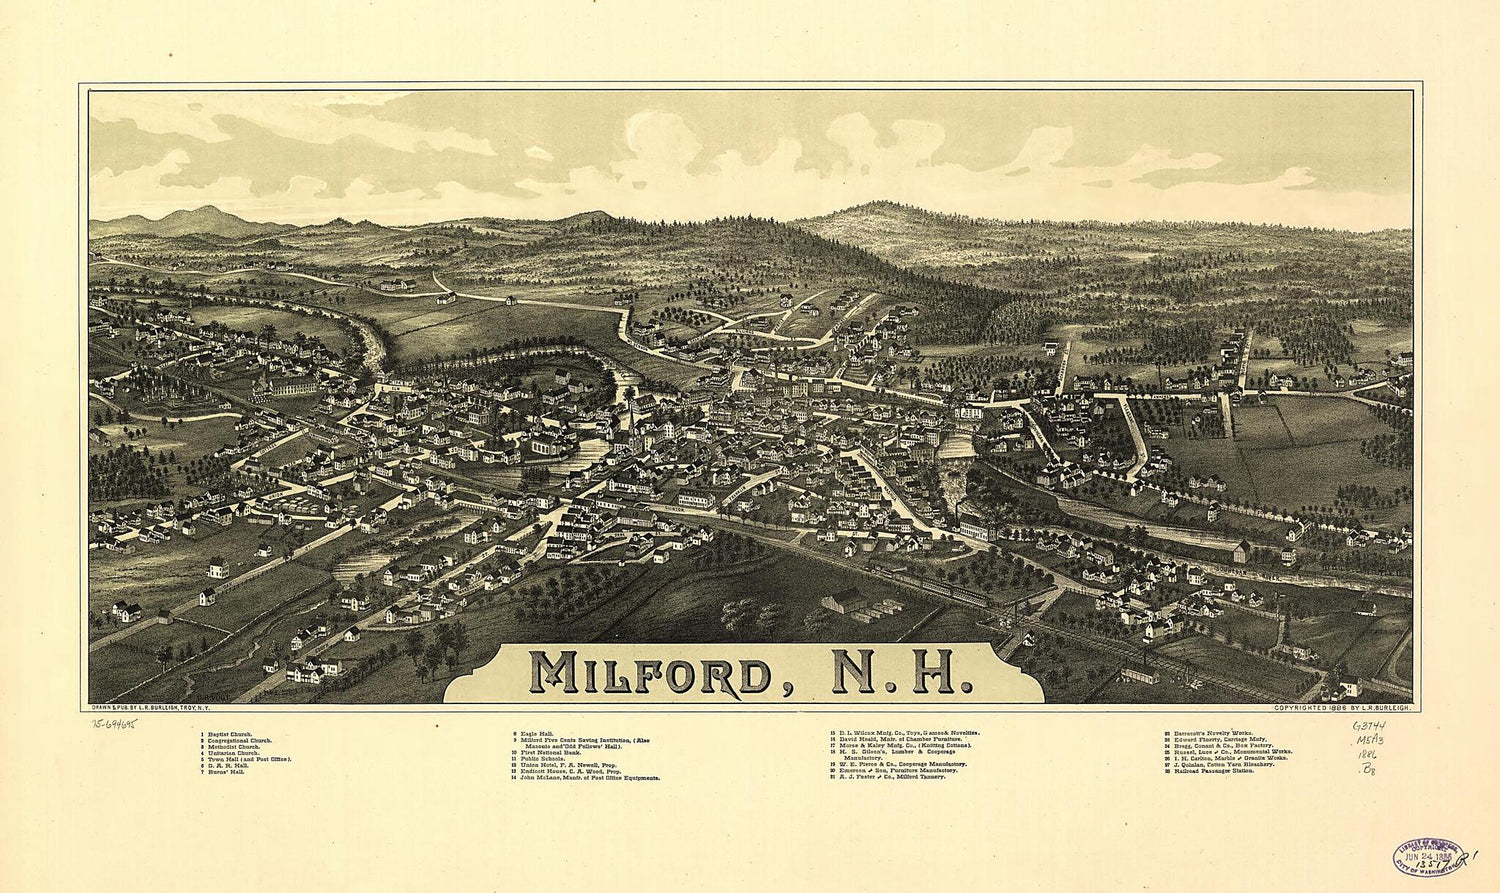 This old map of Milford, New Hampshire from 1886 was created by L. R. (Lucien R.) Burleigh,  C.H. Vogt (Firm) in 1886